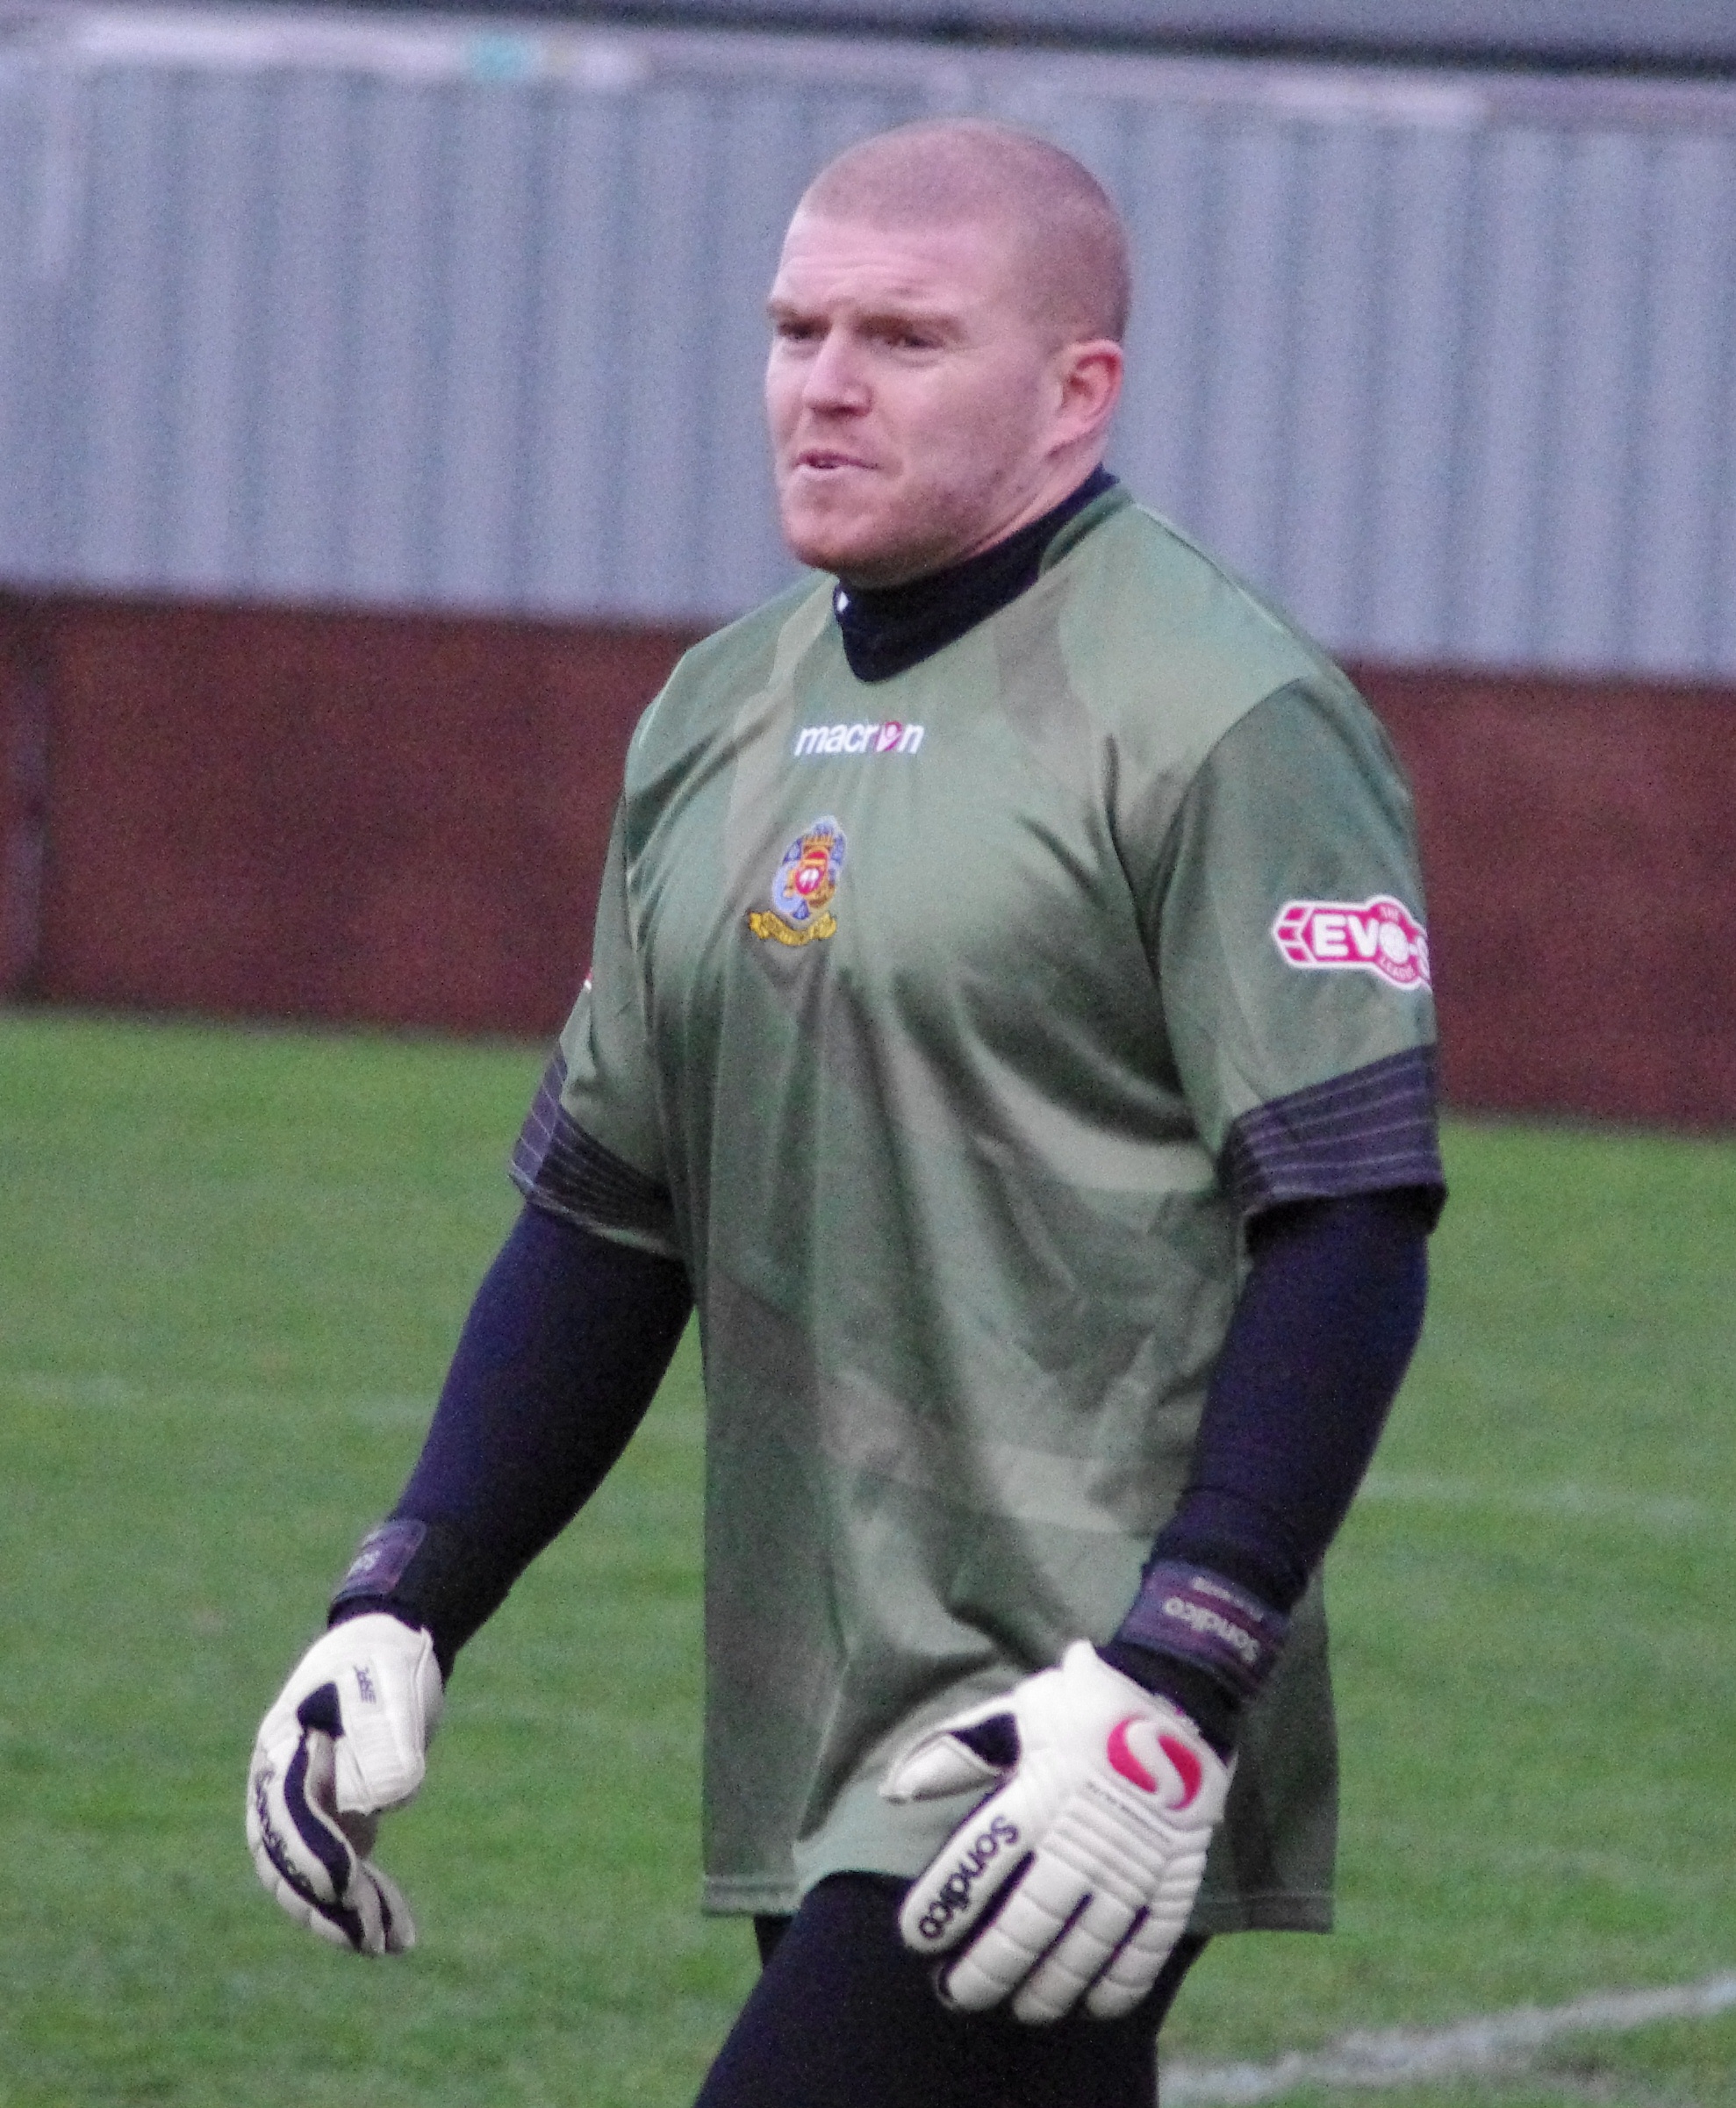 Ossett Town goalkeeper Sam Dobbs will have competition for his goalkeeper's jersey this season